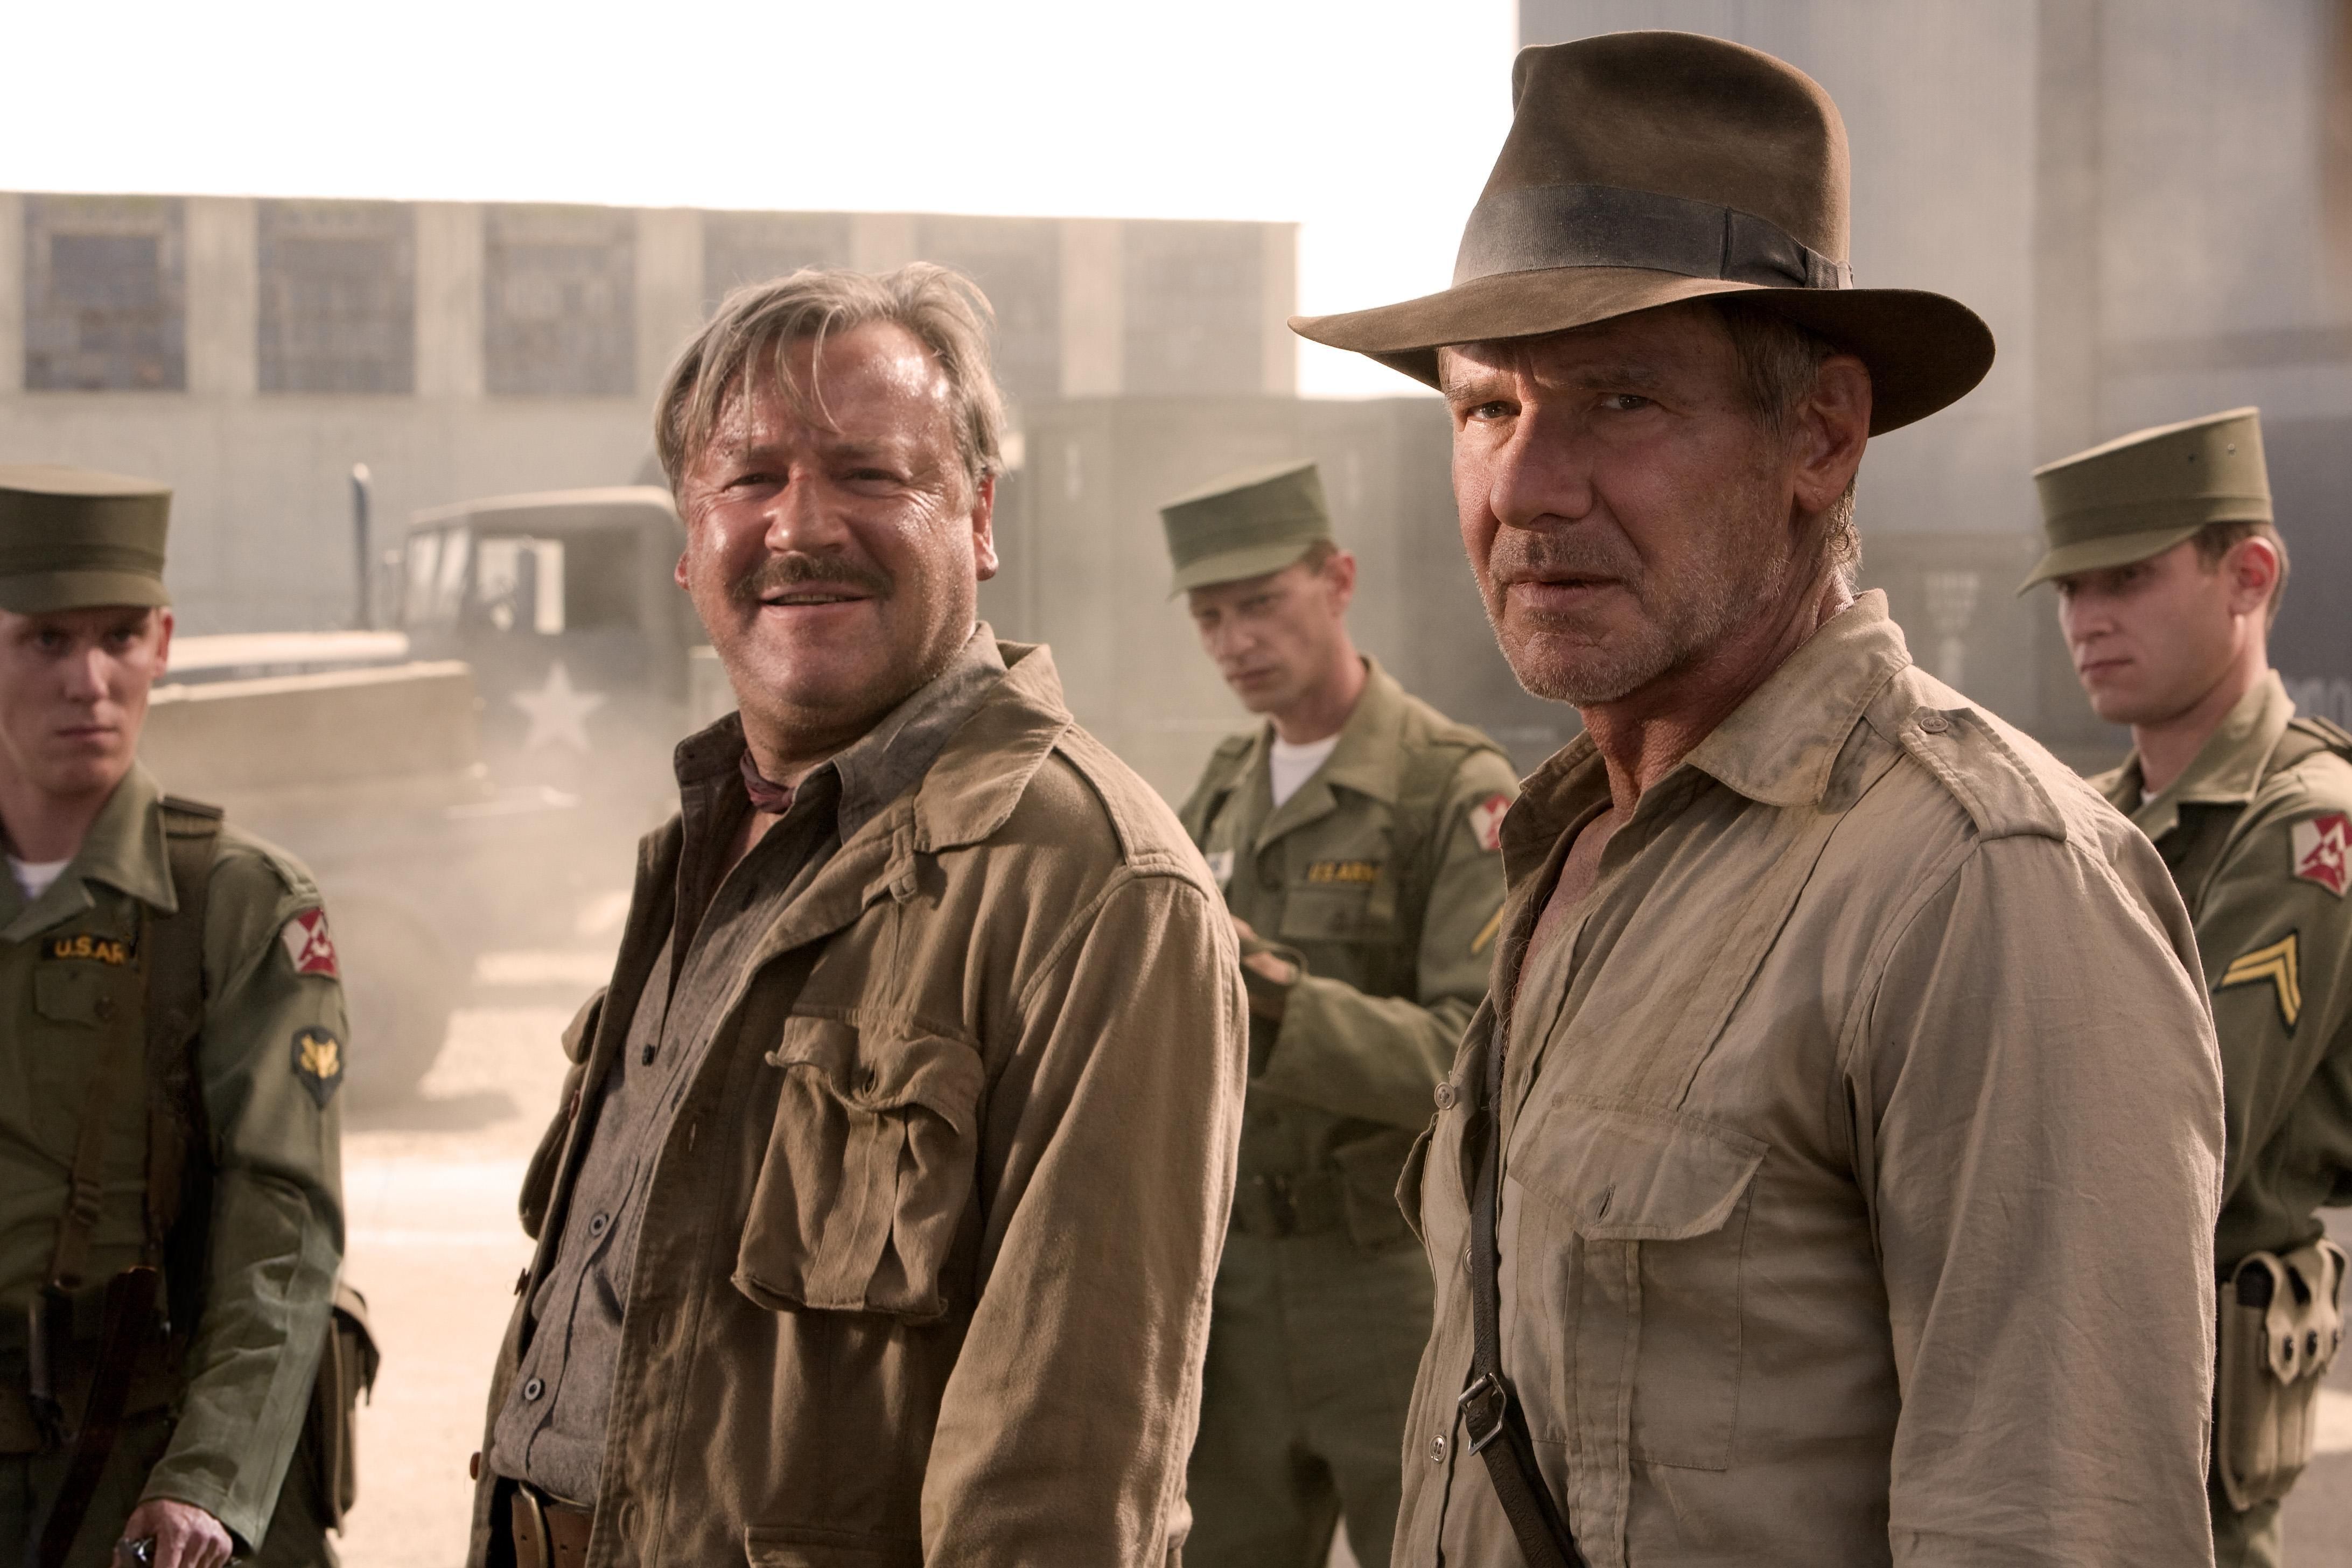 indiana-jones-and-the-kingdom-of-the-crystal-skull-harrison-ford